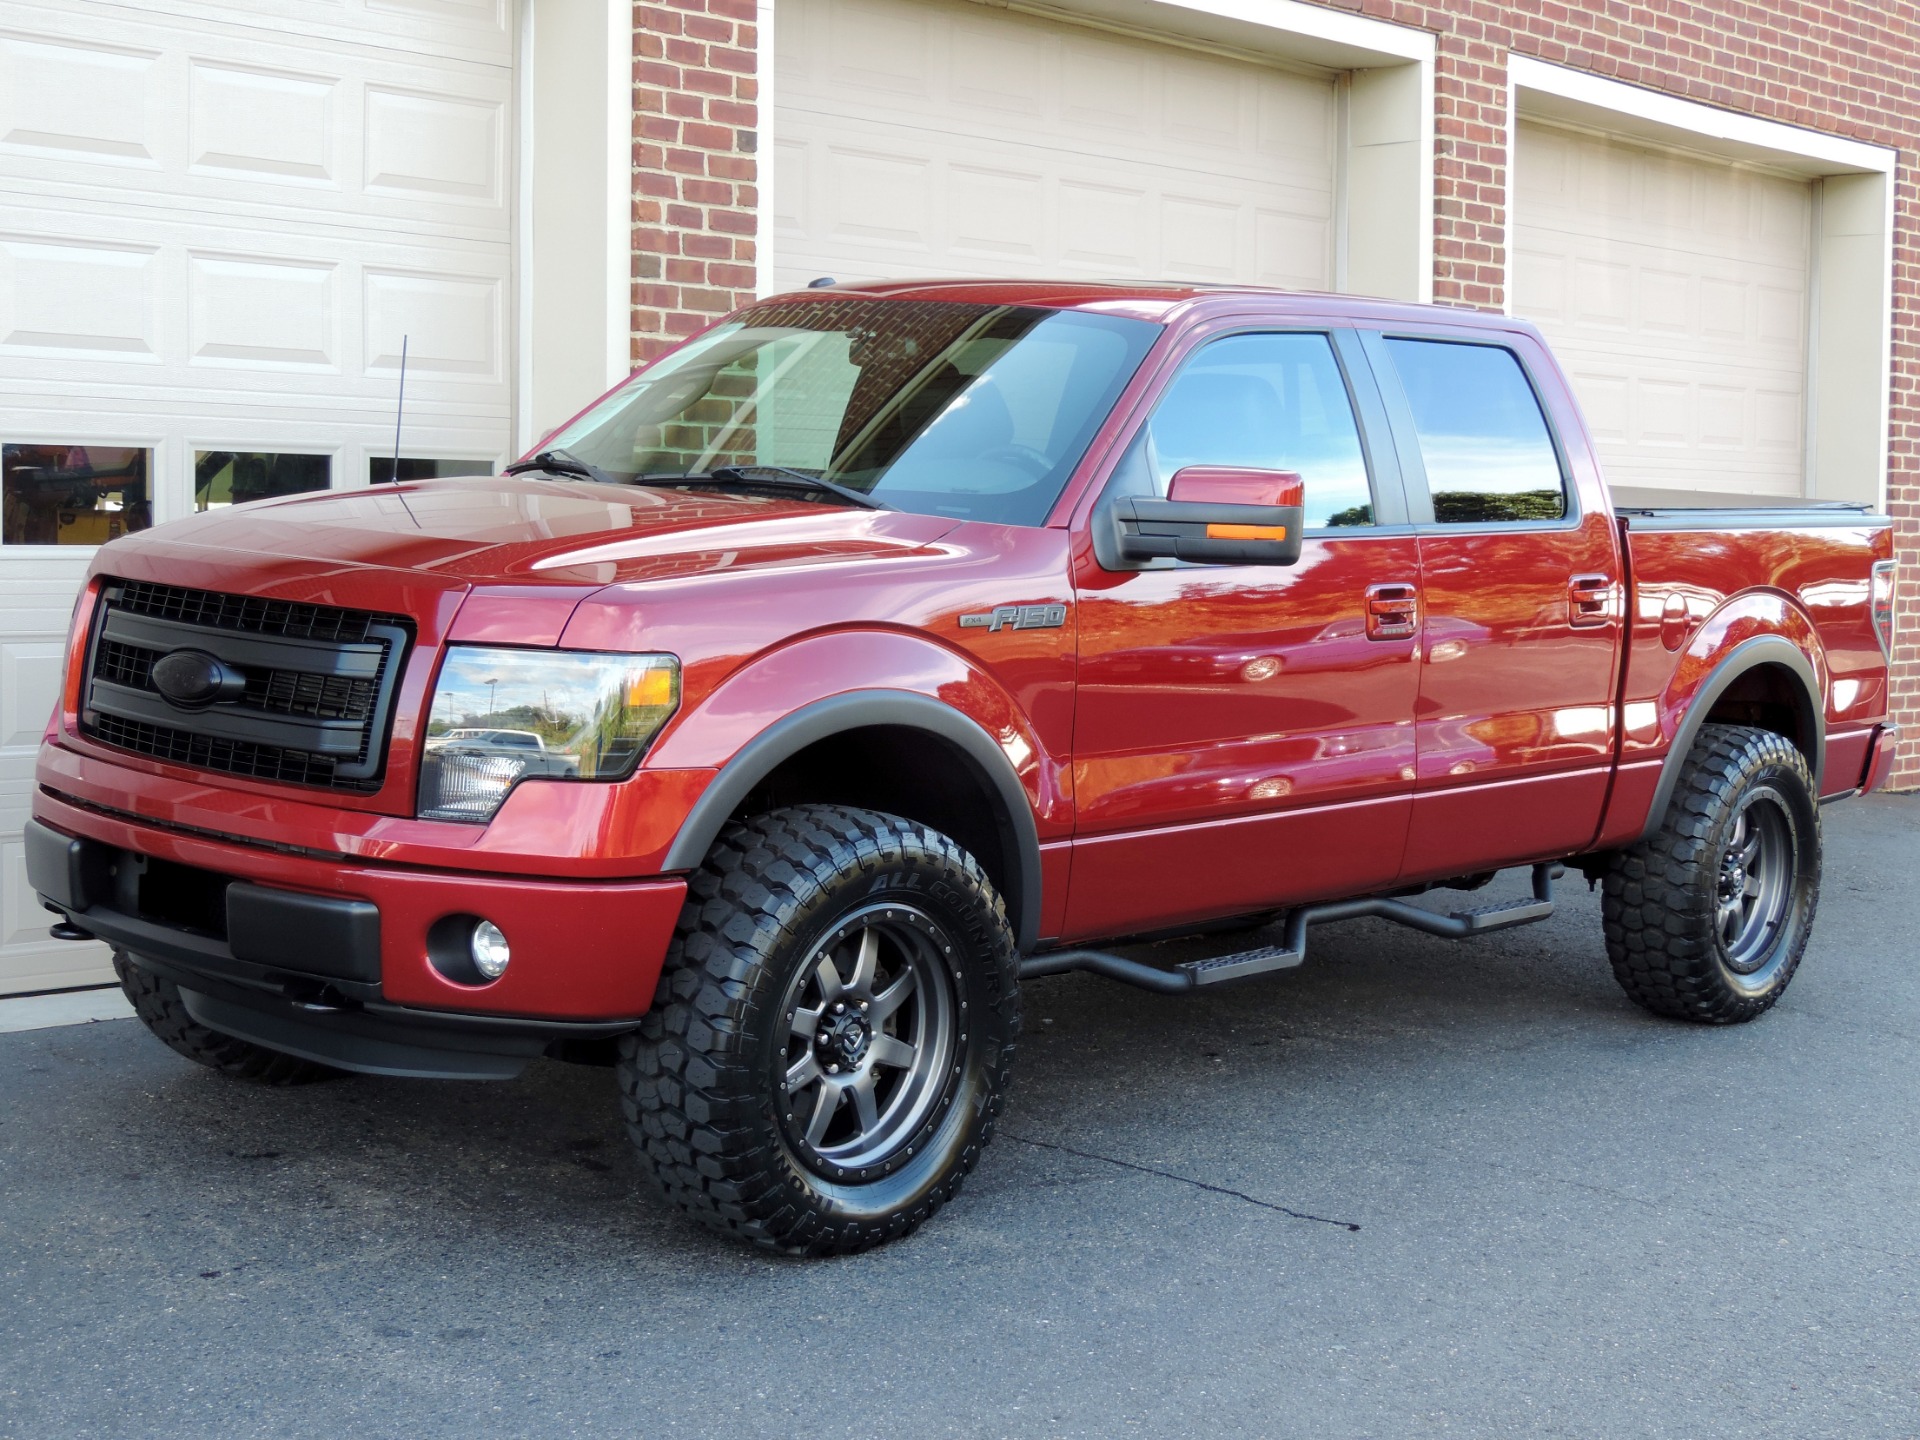 2013 Ford F-150 FX4 Stock # D09922 for sale near Edgewater Park, NJ